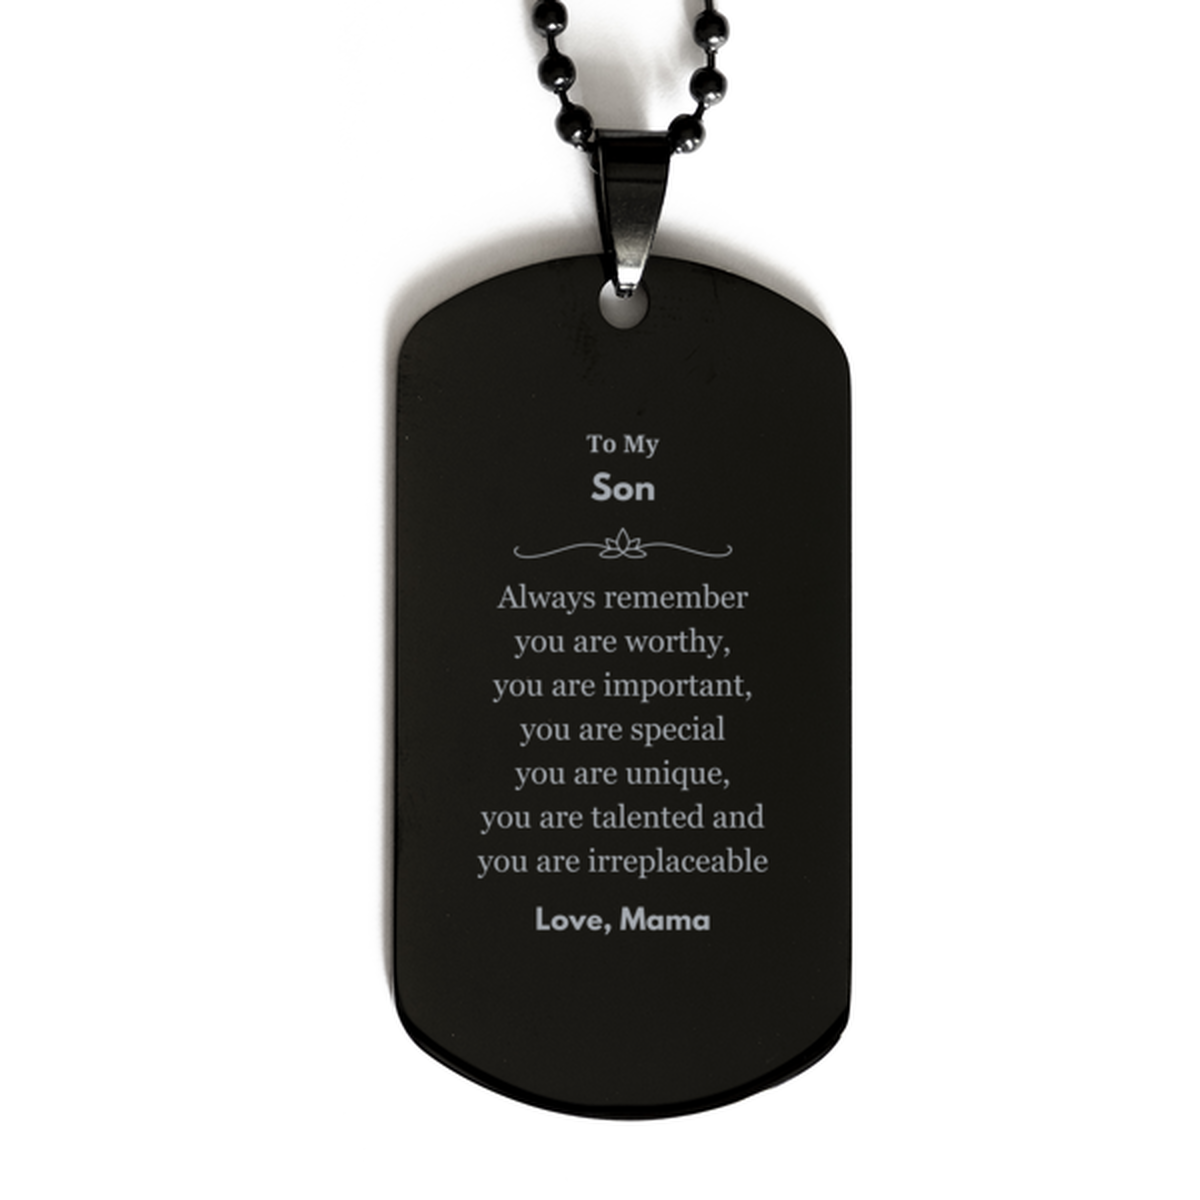 Son Birthday Gifts from Mama, Inspirational Black Dog Tag for Son Christmas Graduation Gifts for Son Always remember you are worthy, you are important. Love, Mama